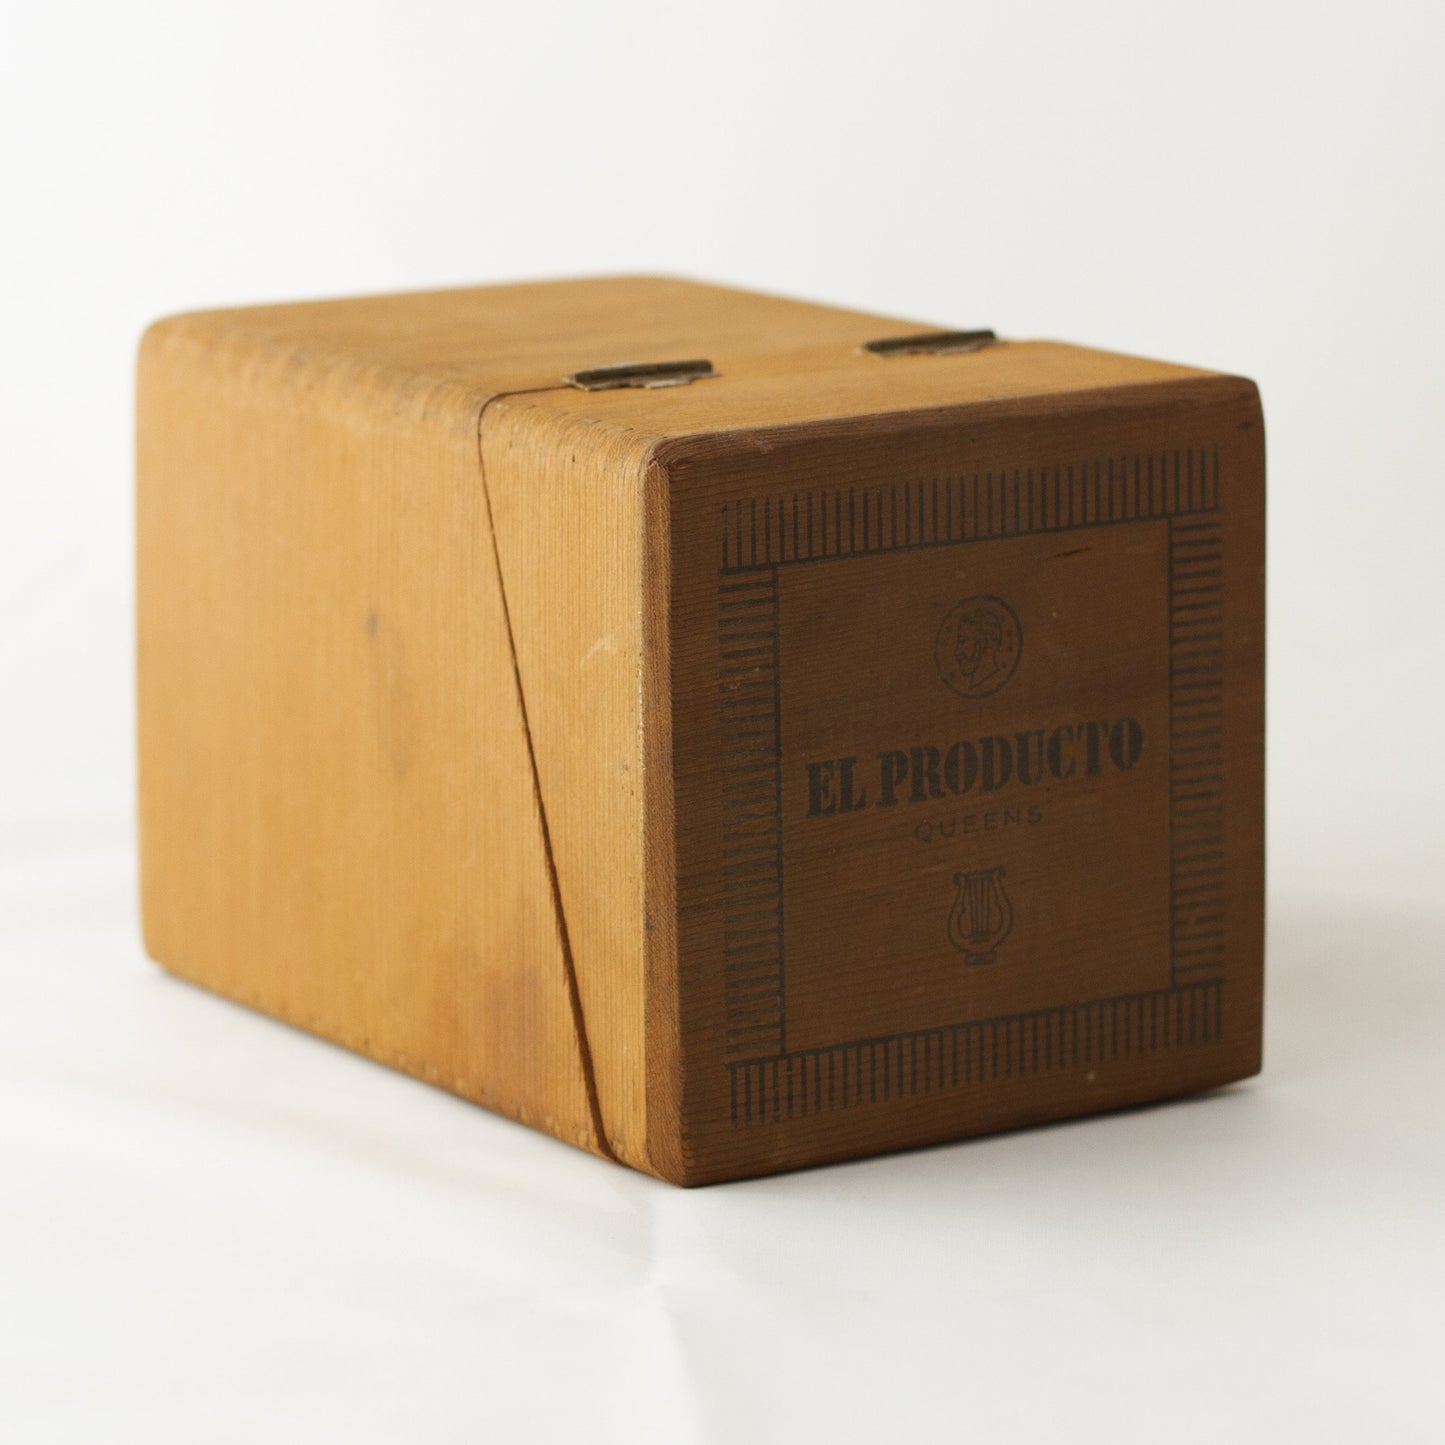 EL PRODUCTO QUEENS 25¢ WOOD CIGAR BOX WITH GLASS TUBES